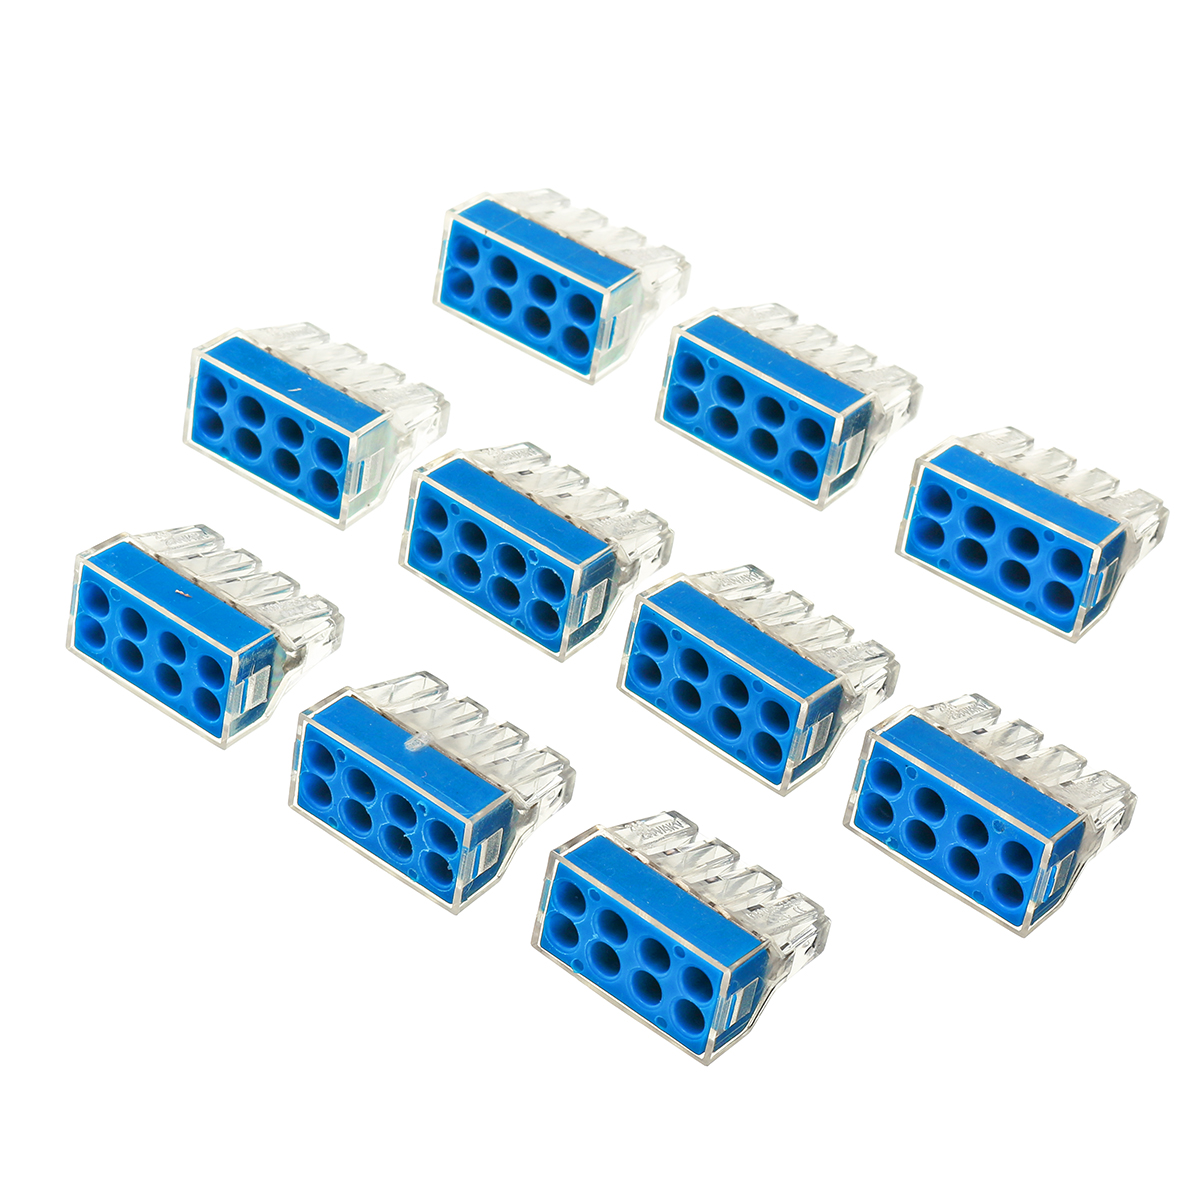 10Pcs-8-Holes-Universal-Compact-Terminal-Block-Electric-Cable-Wire-Connector-1384417-3